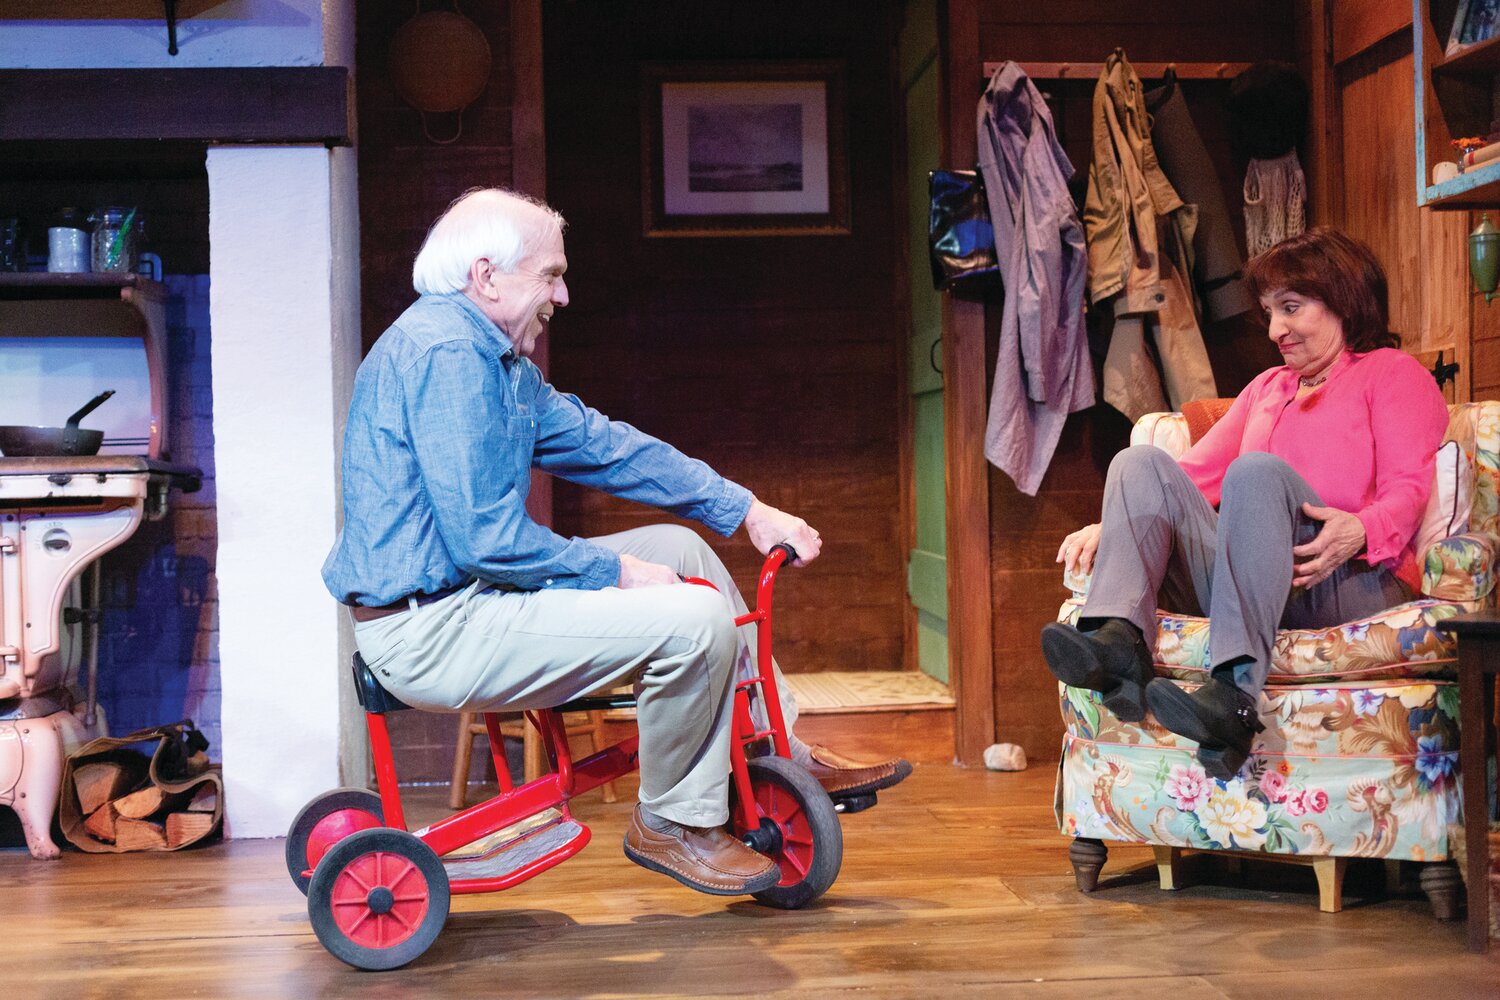 Richard Donelly as Robin with Phyllis Kay as Rose in “The Children” at Gamm Theatre.